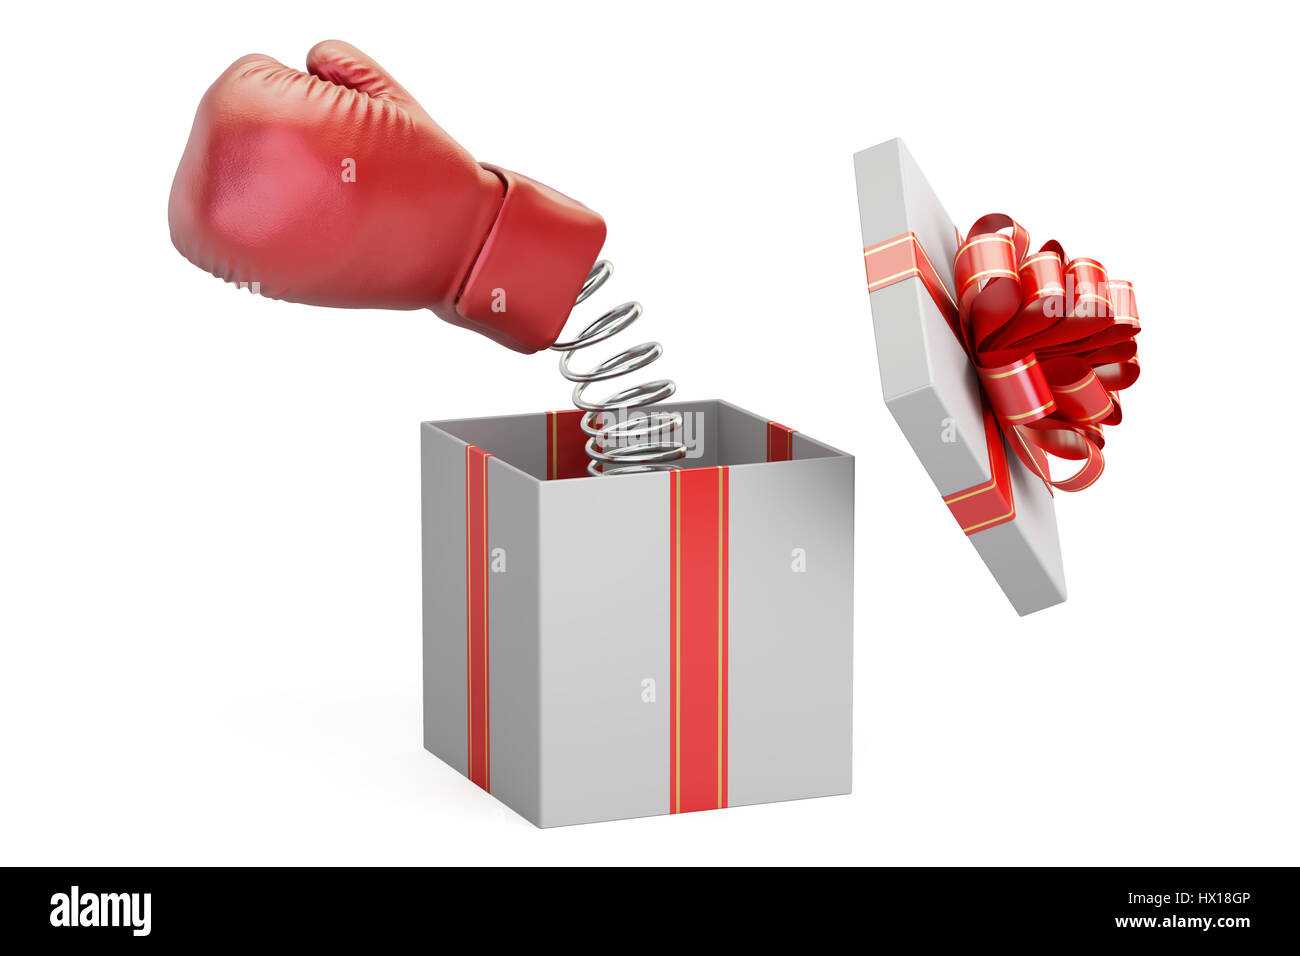 Boxing glove coming out from a gift box, 3D rendering